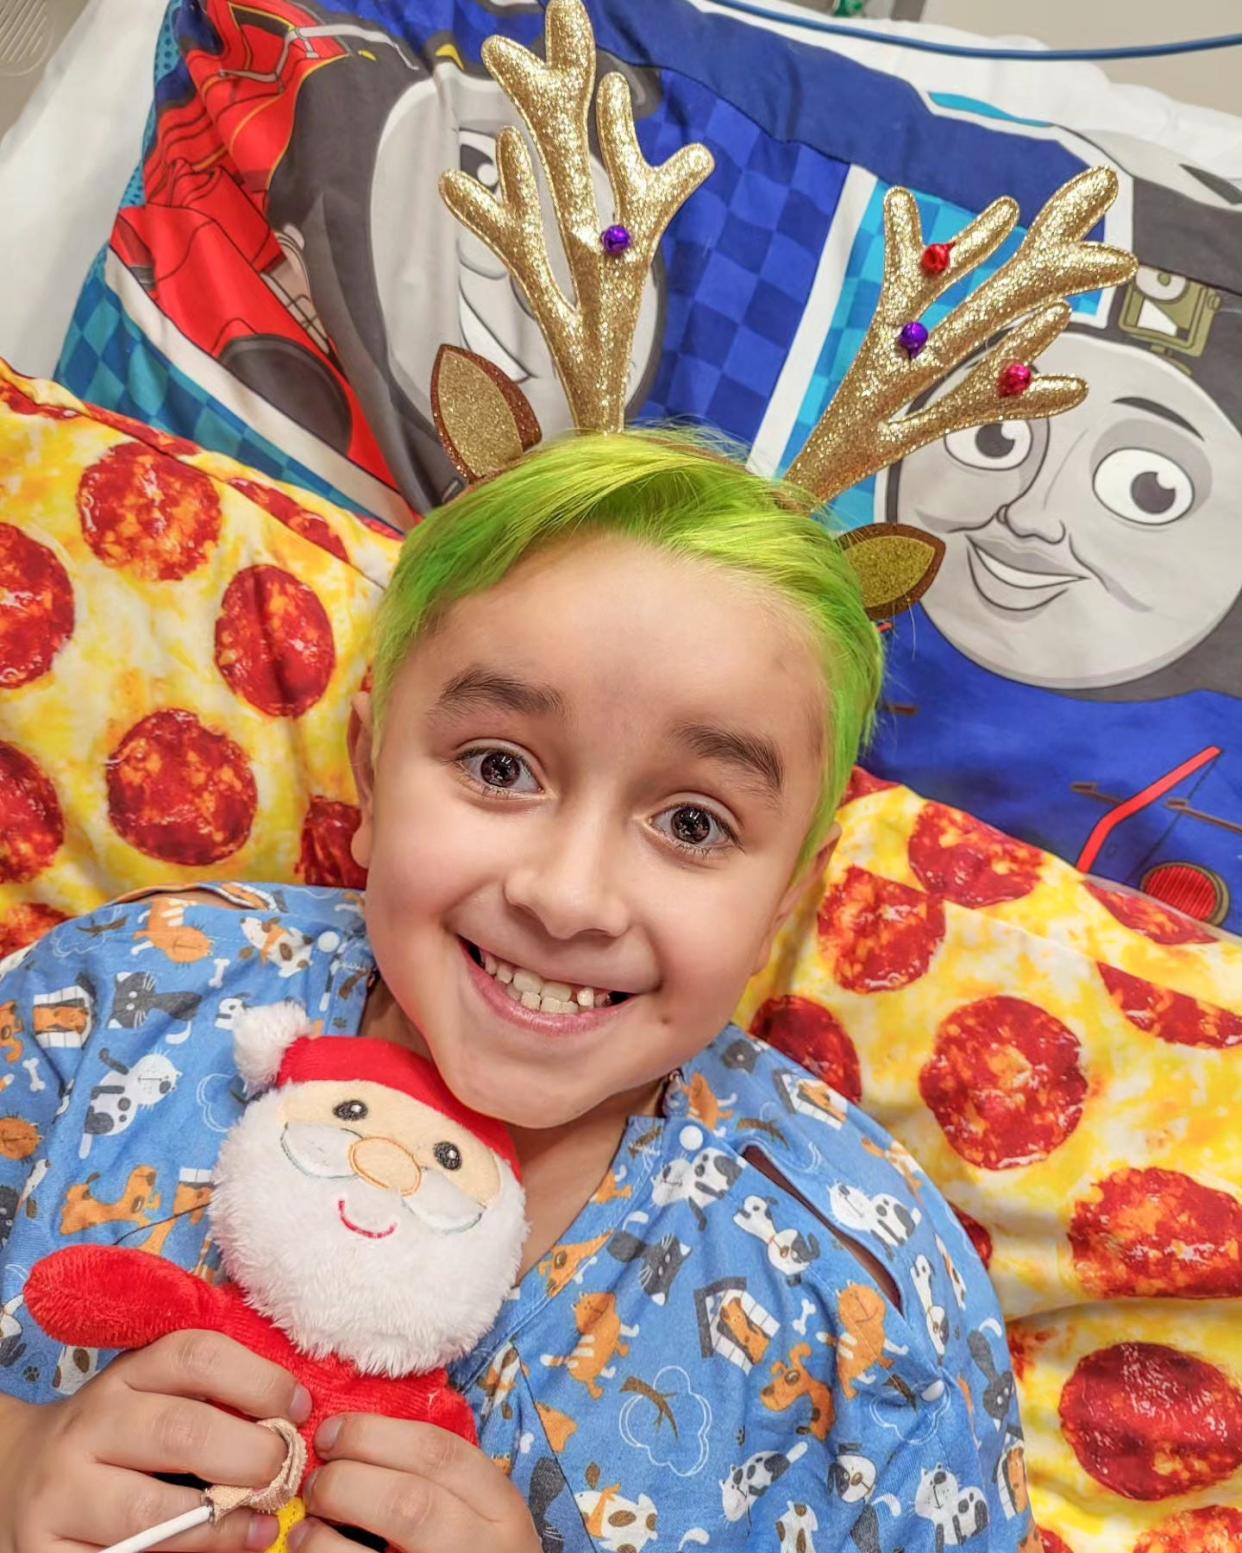 Oliver Aleman, 8, became the 30th patient to have a heart transplant at Dell Children's Medical Center. His new heart, transplanted on Dec. 13, has made a difference in his energy level and the oxygen to his skin.